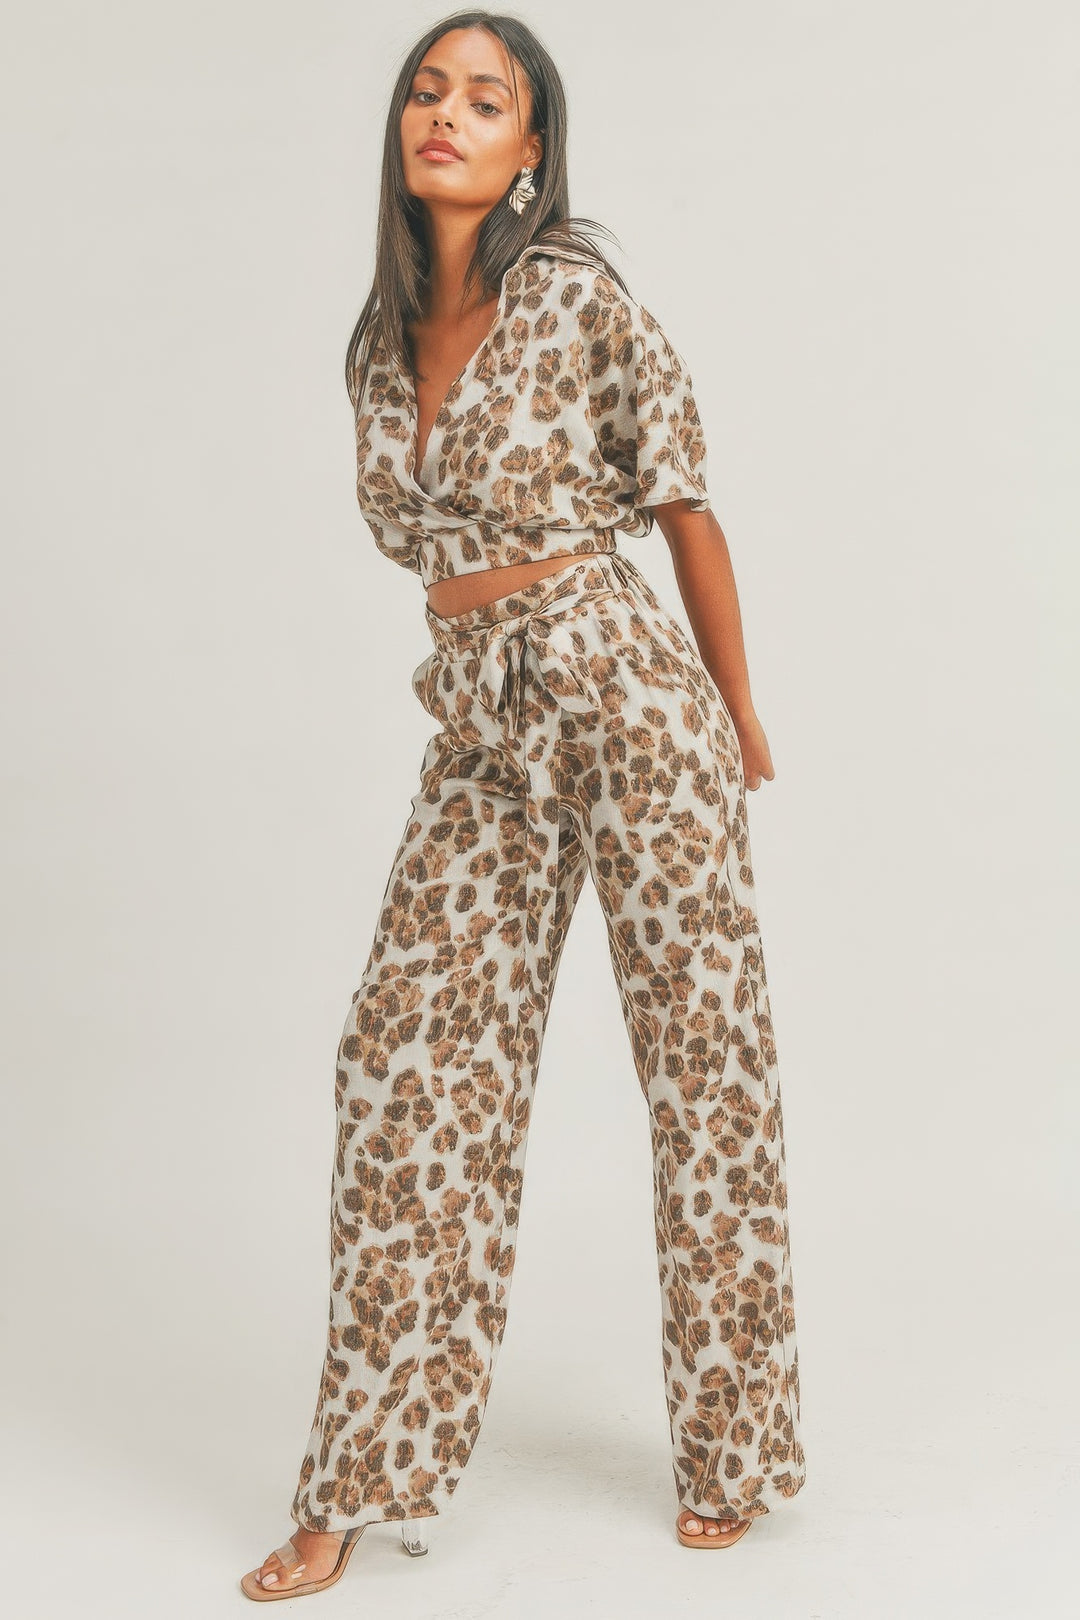 a person in a leopard print jumpsuit